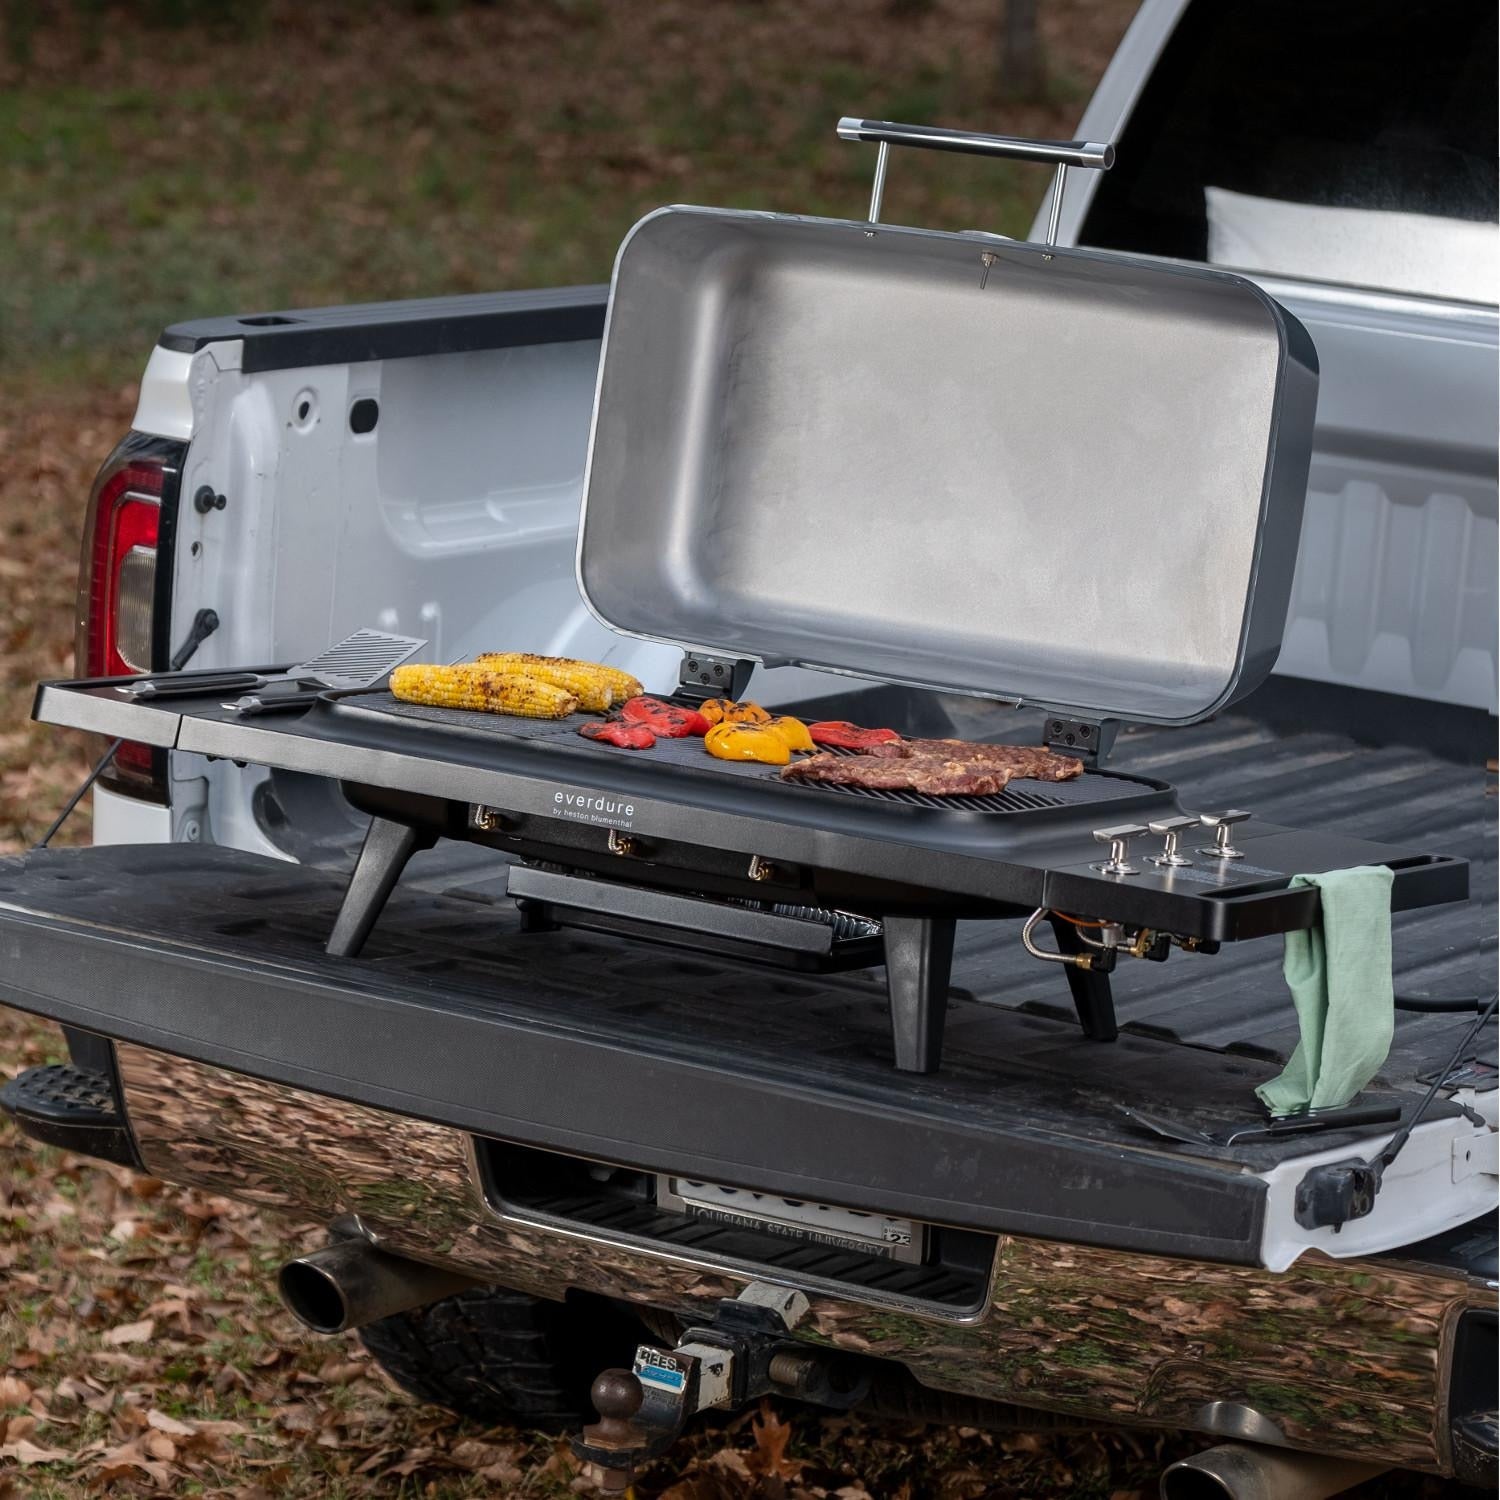 Everdure By Heston Blumenthal FURNACE 52-Inch 3-Burner Propane Gas Grill With Stand - HBG3GUS - Room By The Tree 